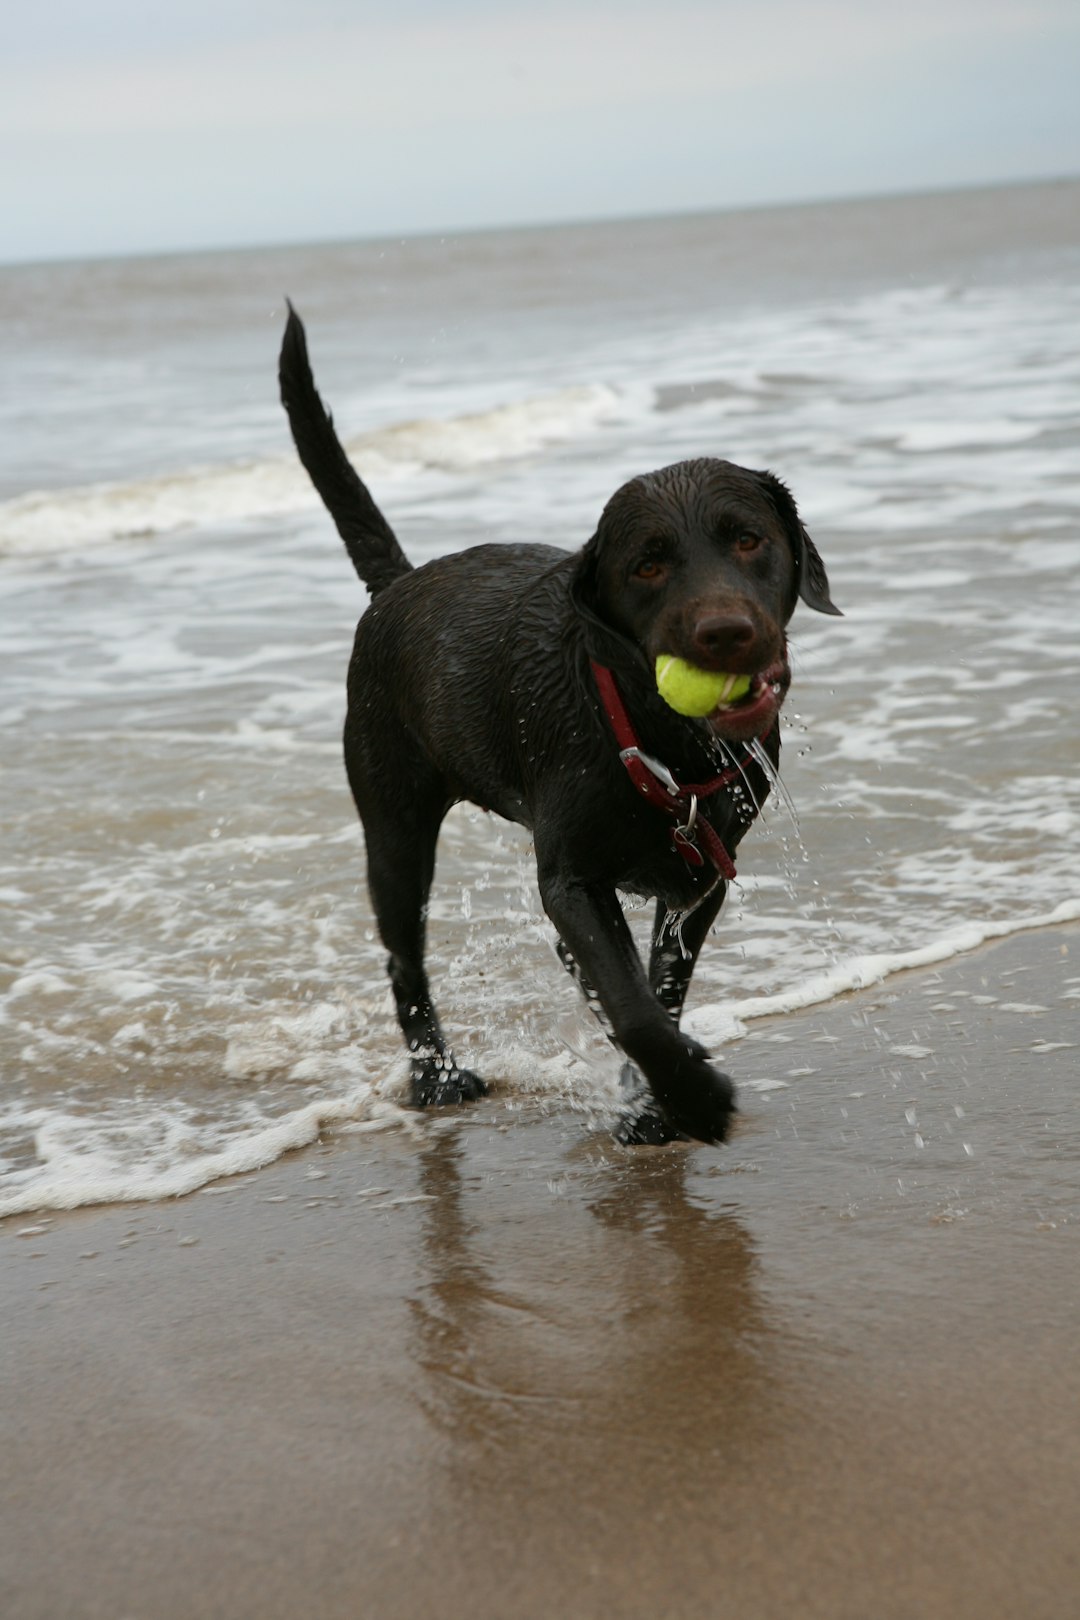 black short coated dog biting green ball on water during daytime